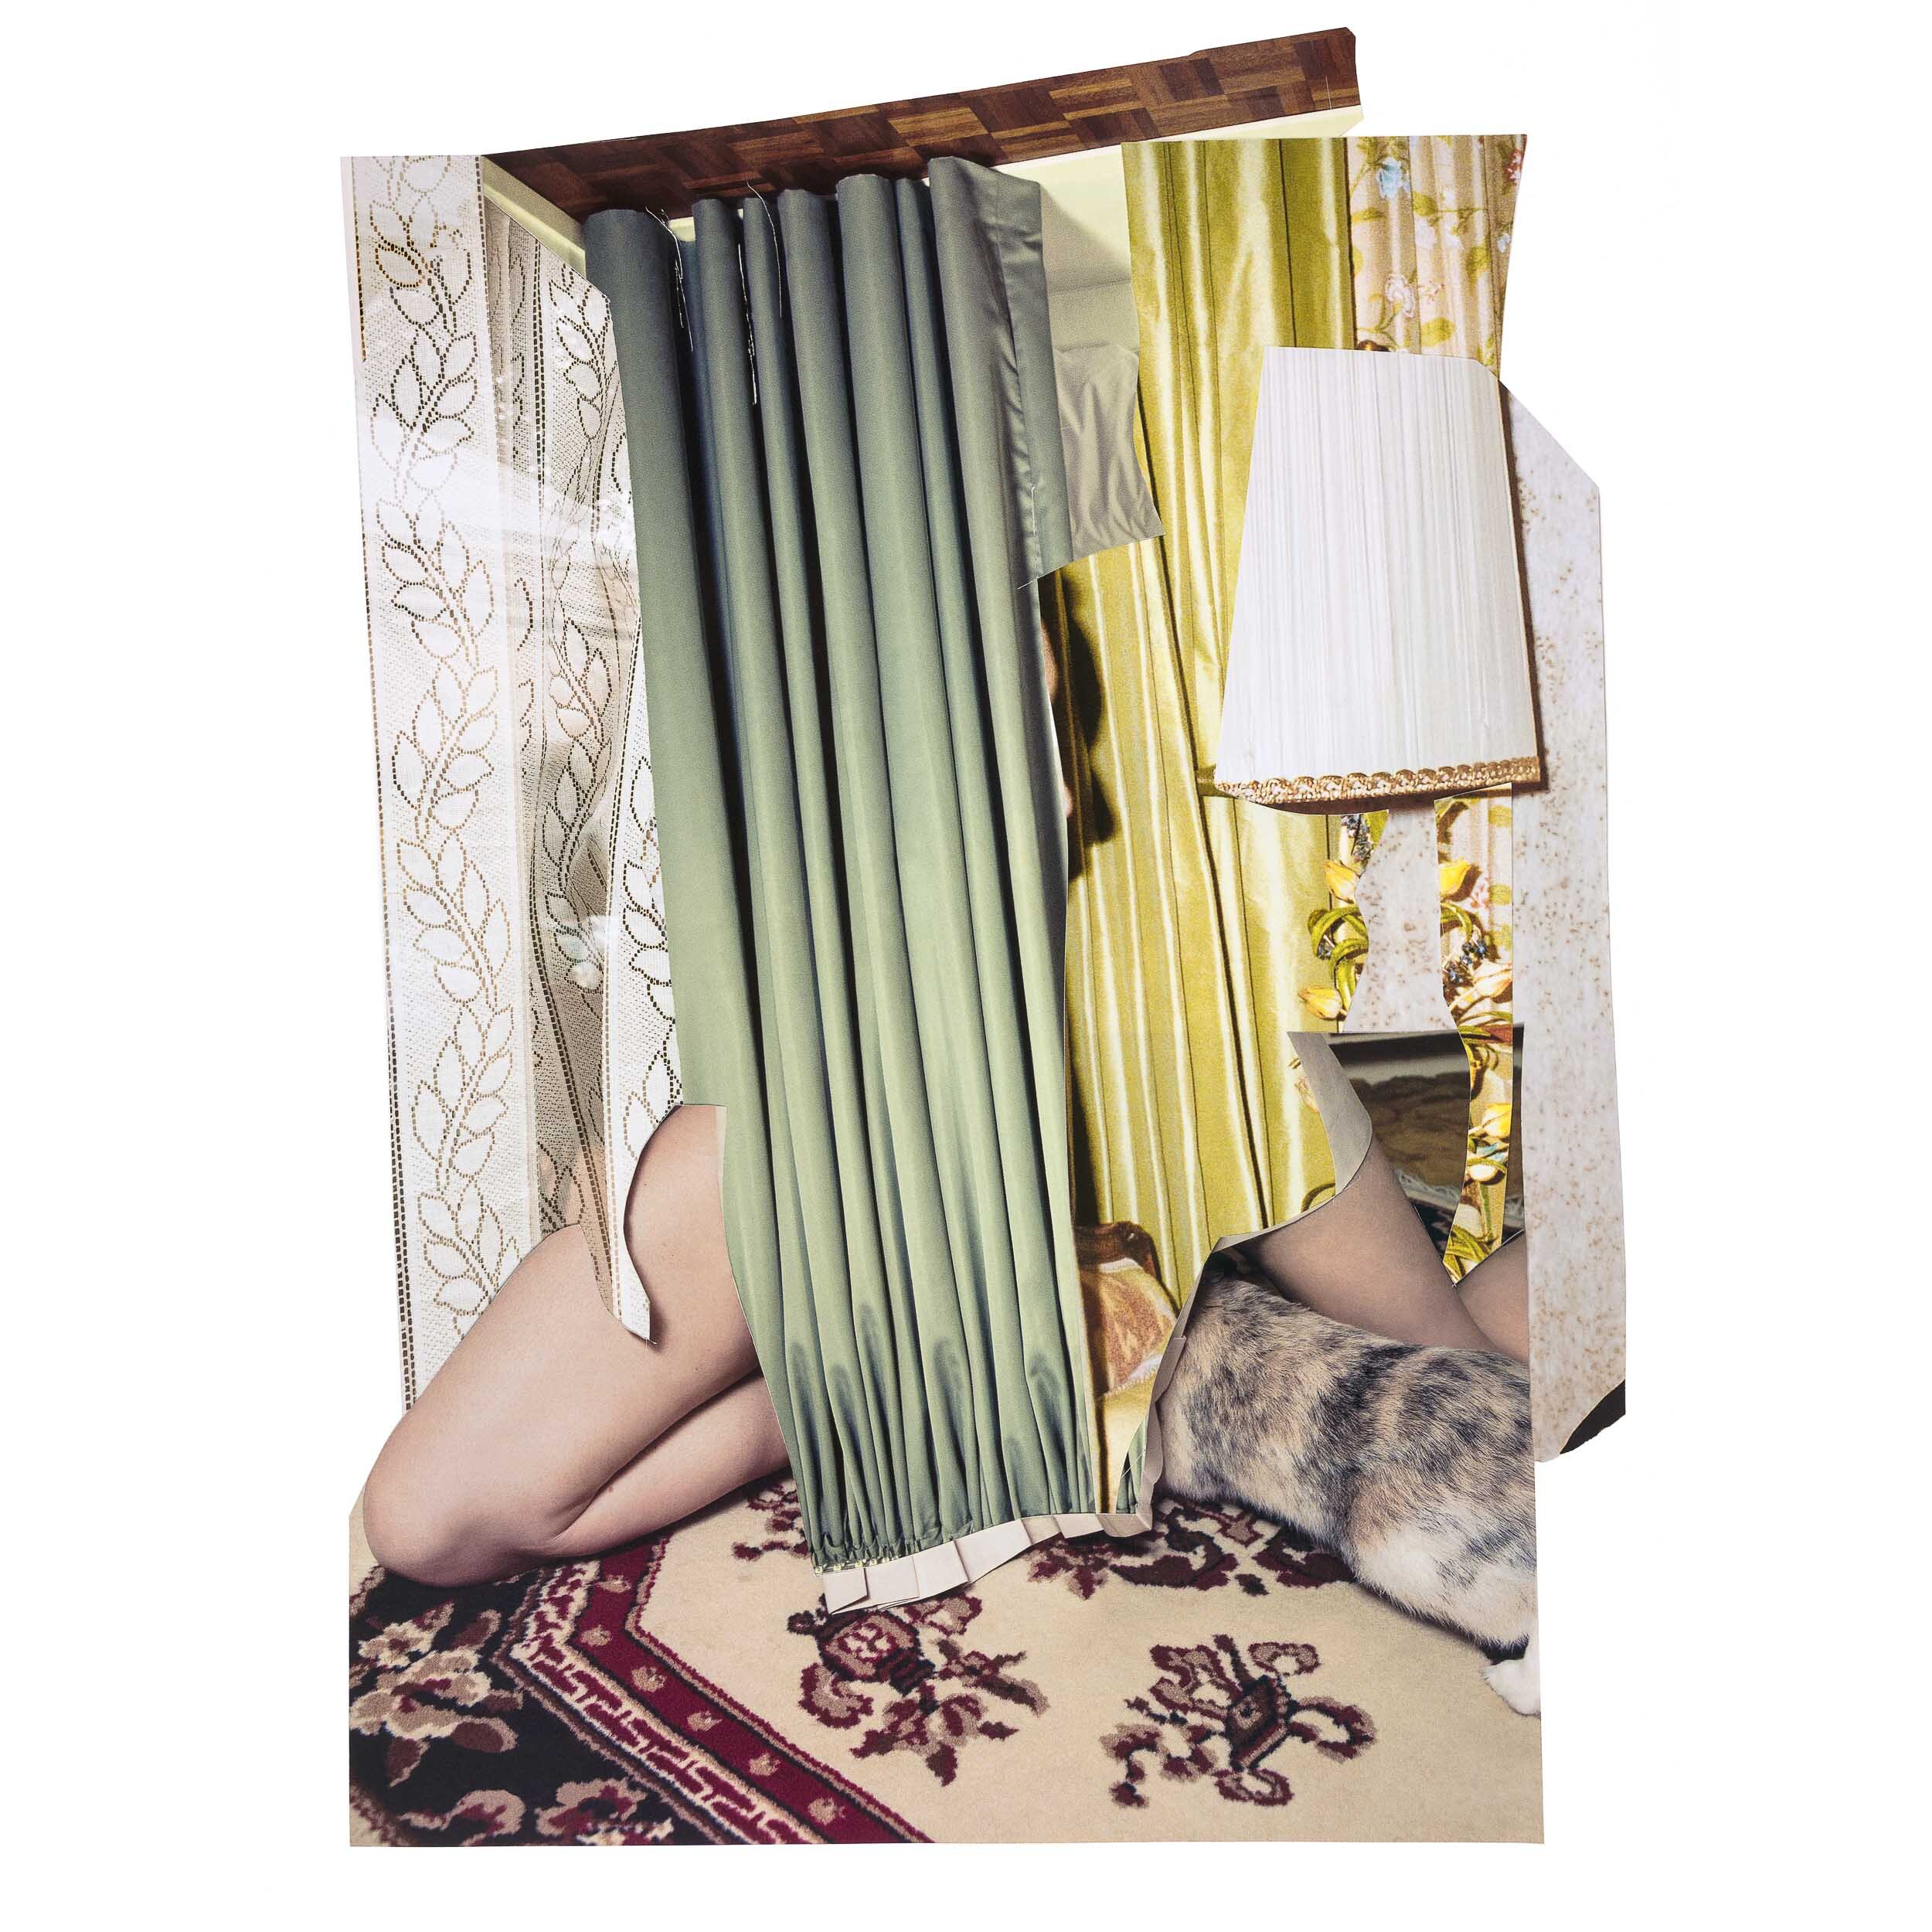 Web Oct 21 Green Curtains with Rug 2021 K Young ©.jpg